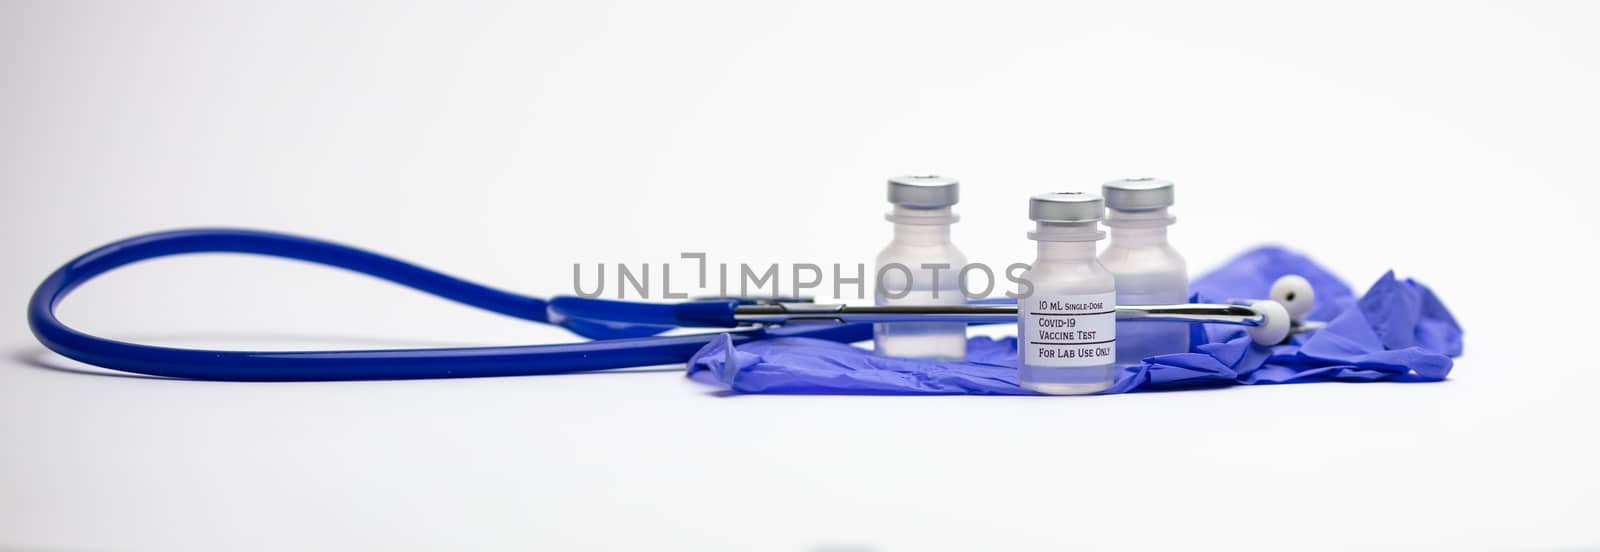 Three Covid-19 test vaccine vials on top of blue medical gloves and surrounded by a blue stethoscope.